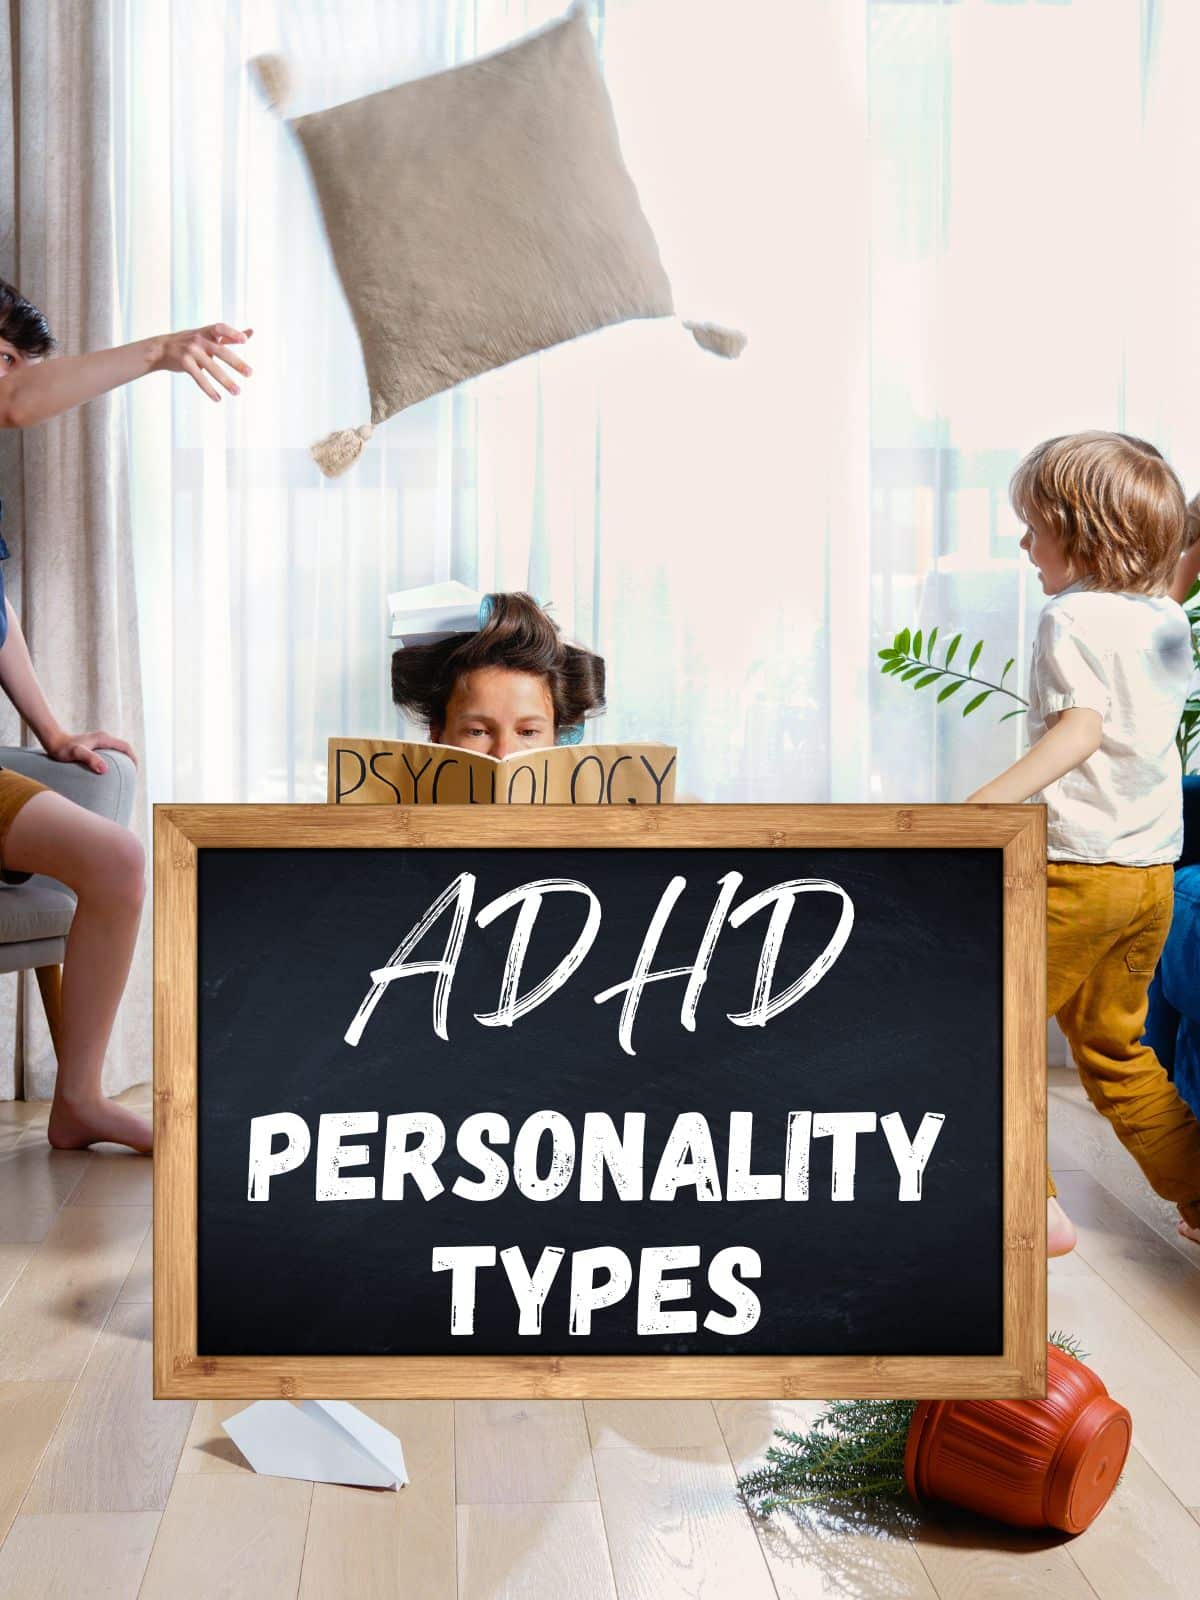 Three kids with different personalities, two playing and throwing pillows, one reading quietly a book that says "psychology" and the words "ADHD personality types"